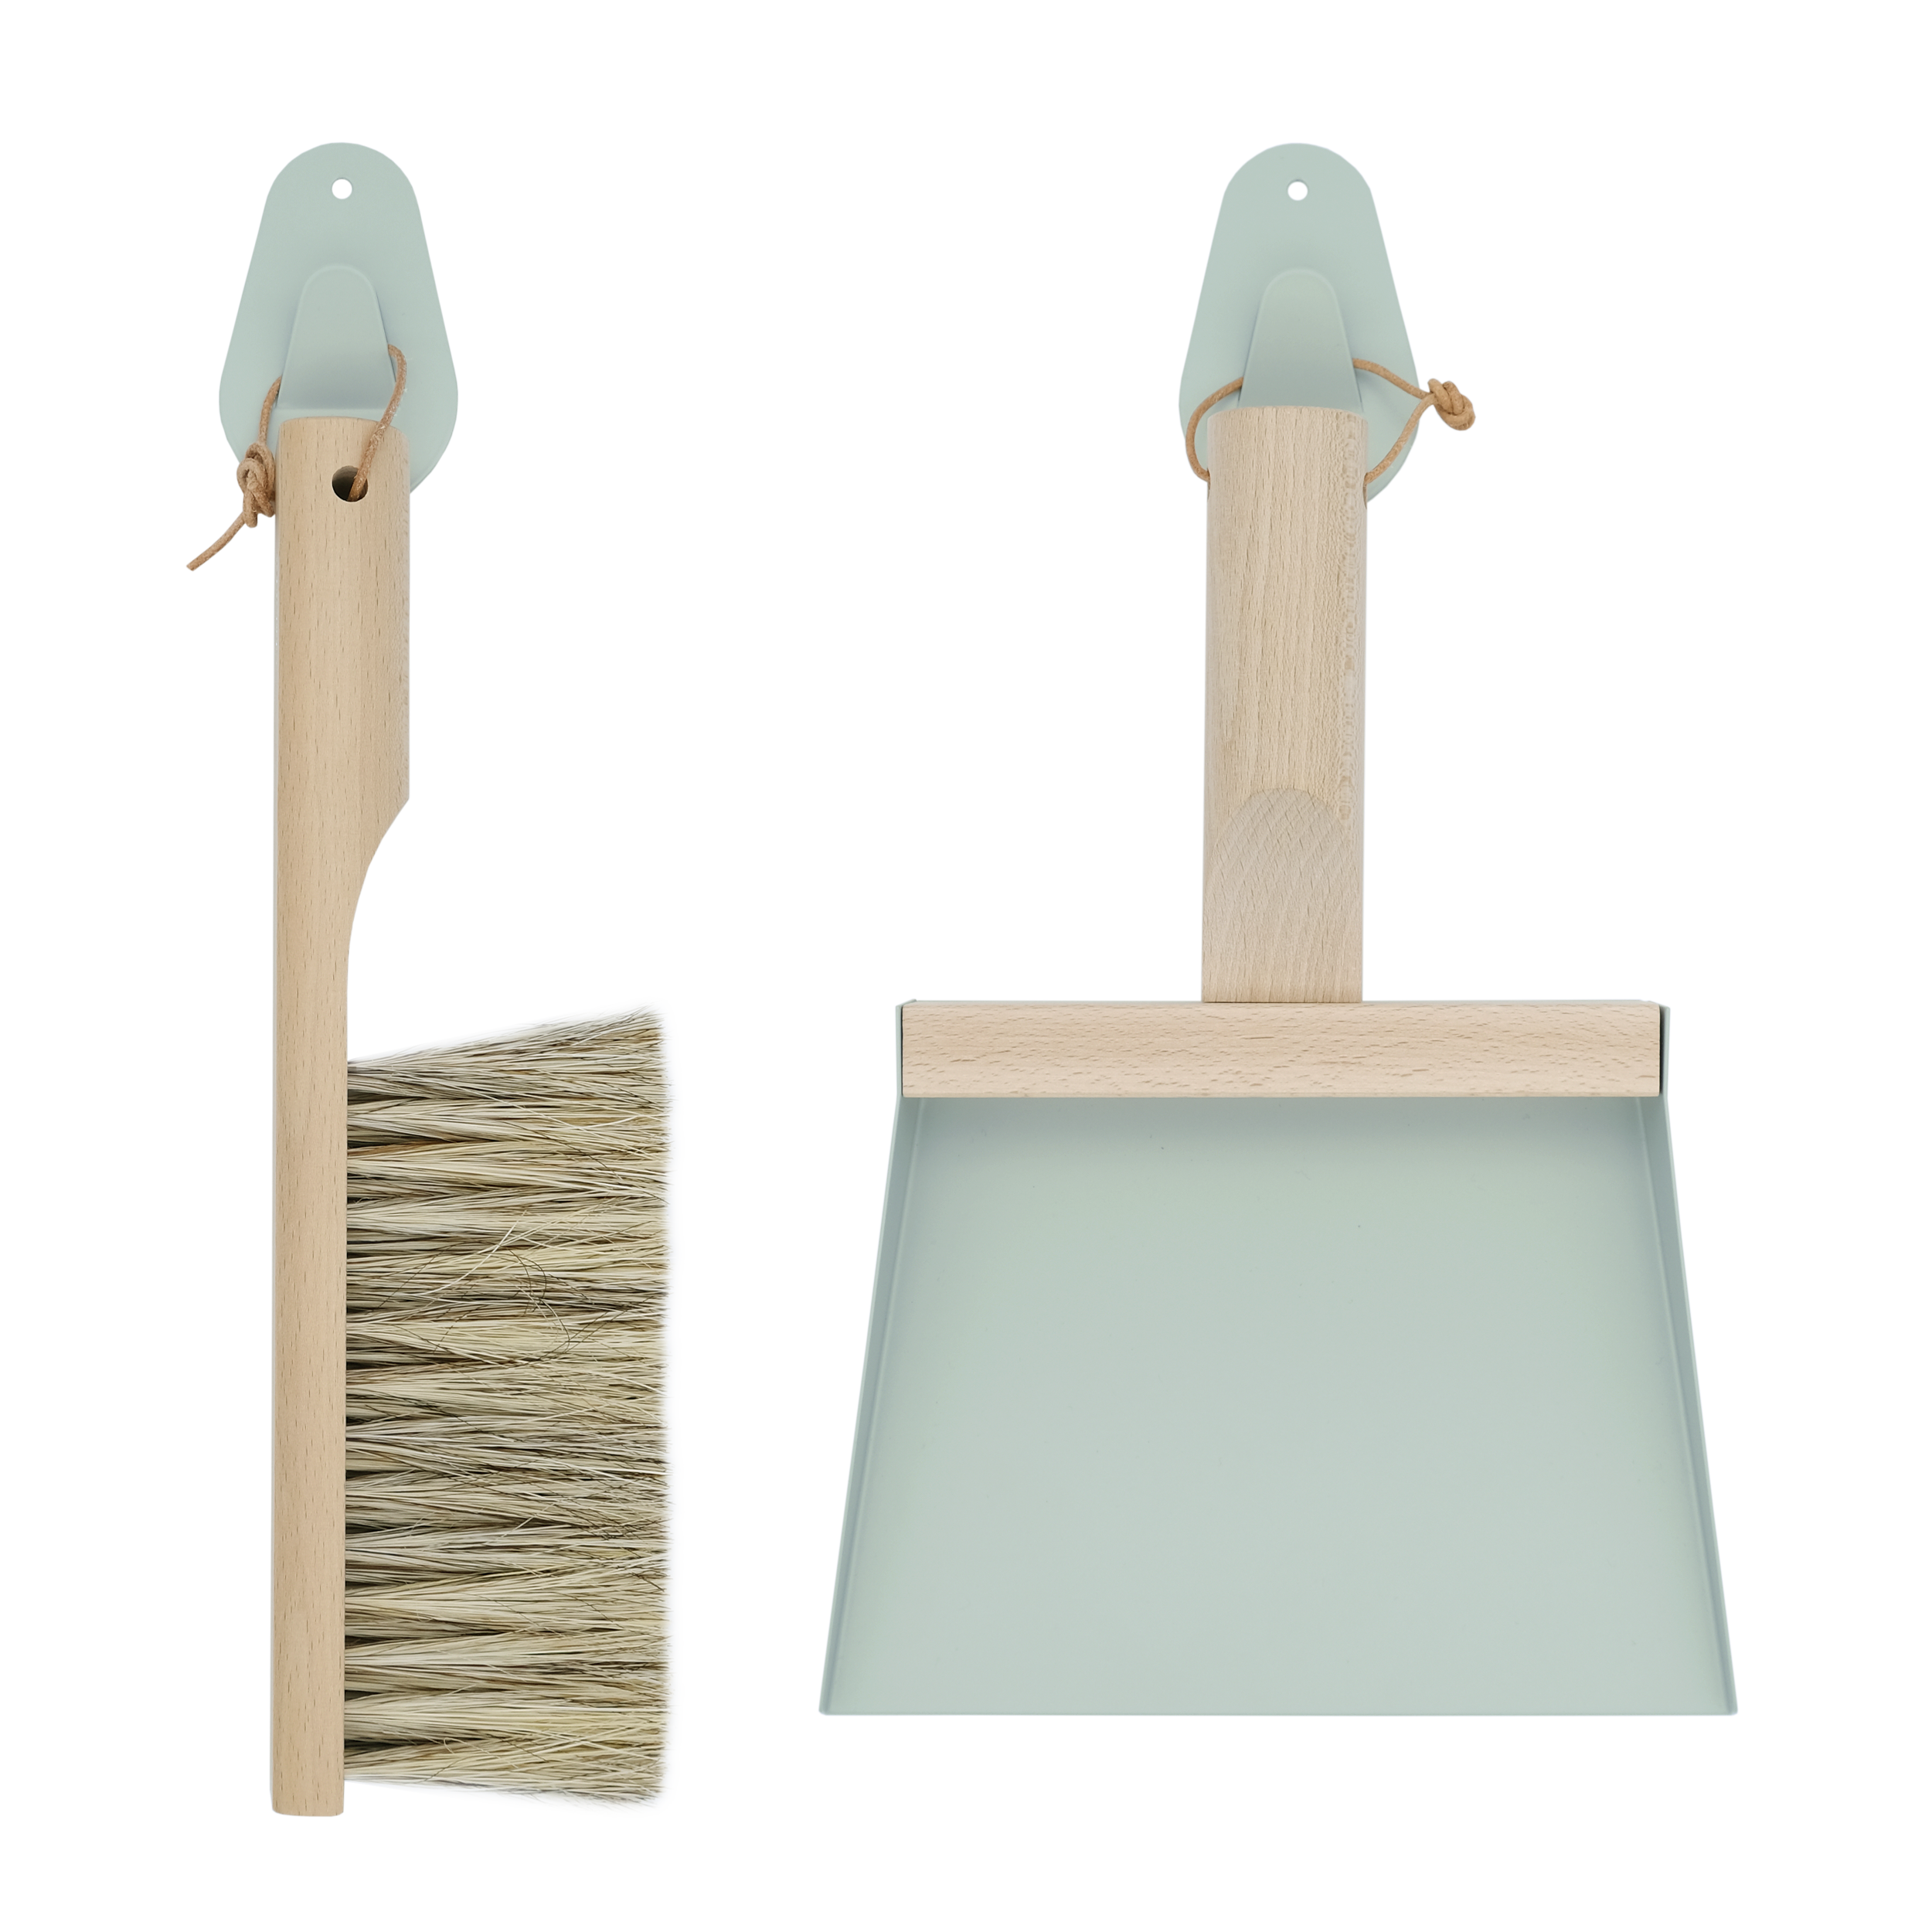 Andrée Jardin Mr. and Mrs. Clynk Dustpan & Natural Brush with Wall Hooks Set "Coffret" Gift Set Grey Green Utilities Andrée Jardin Back in stock Brand_Andrée Jardin Home_Broom Sets Home_Household Cleaning New Arrivals coffret-crochets-pelle-balayette-clynk-nature-3213-PNG_ce2cf029-85d4-4107-ae21-cdaa6a246ebf